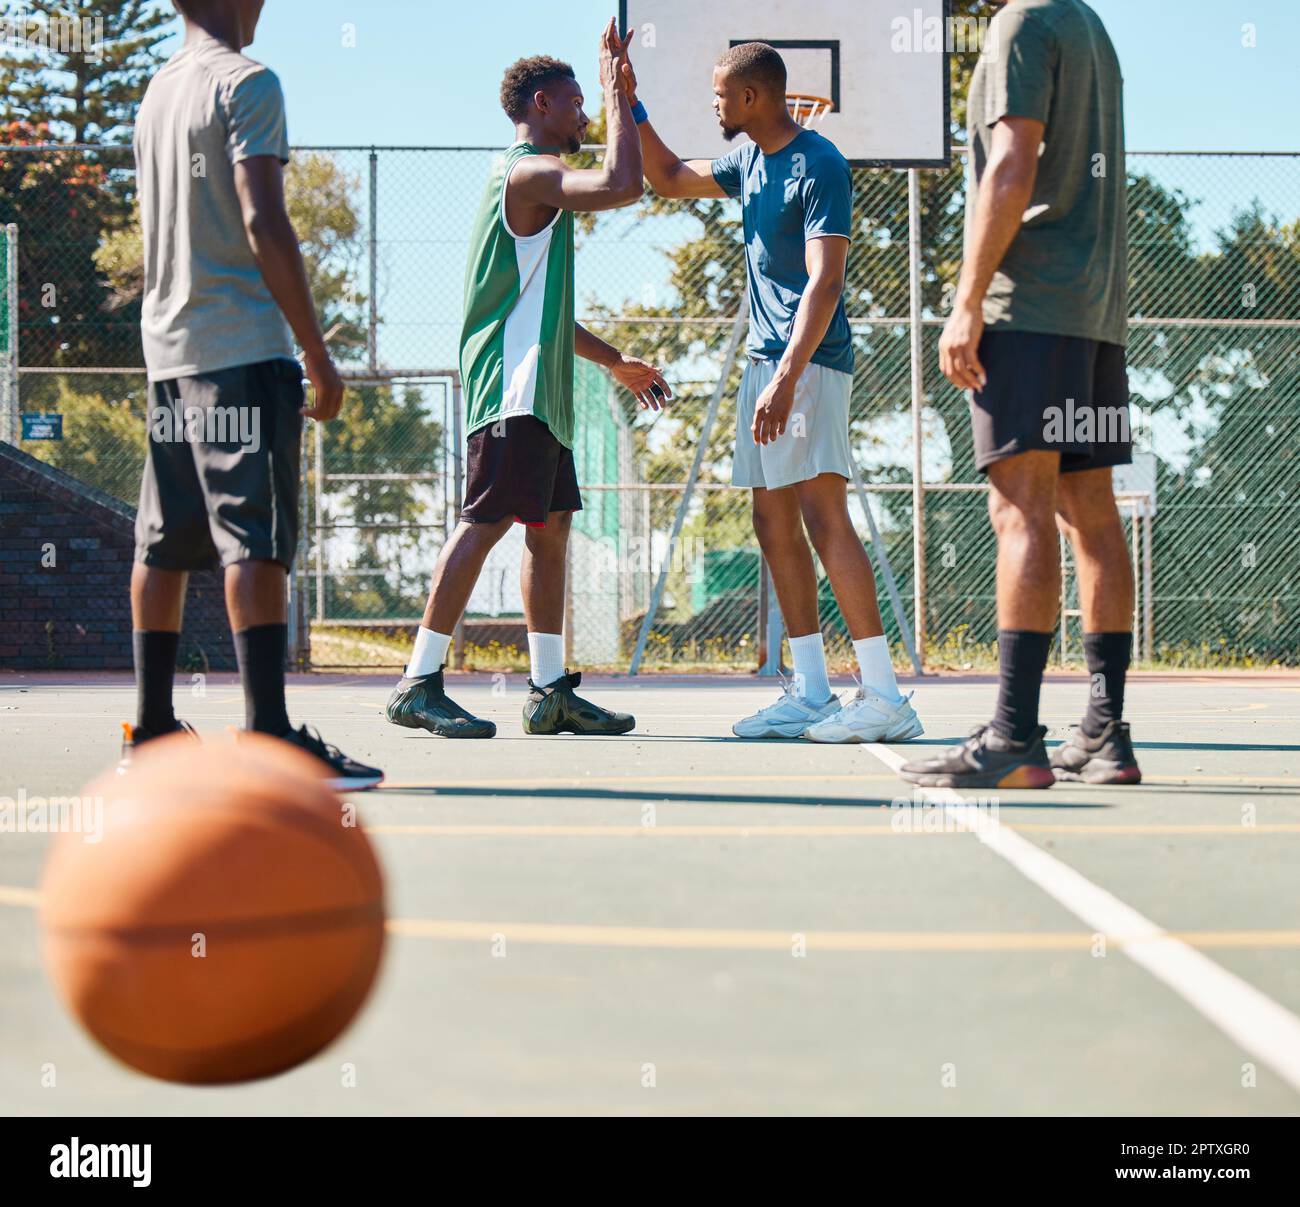 Referee basketball hi-res stock photography and images - Alamy